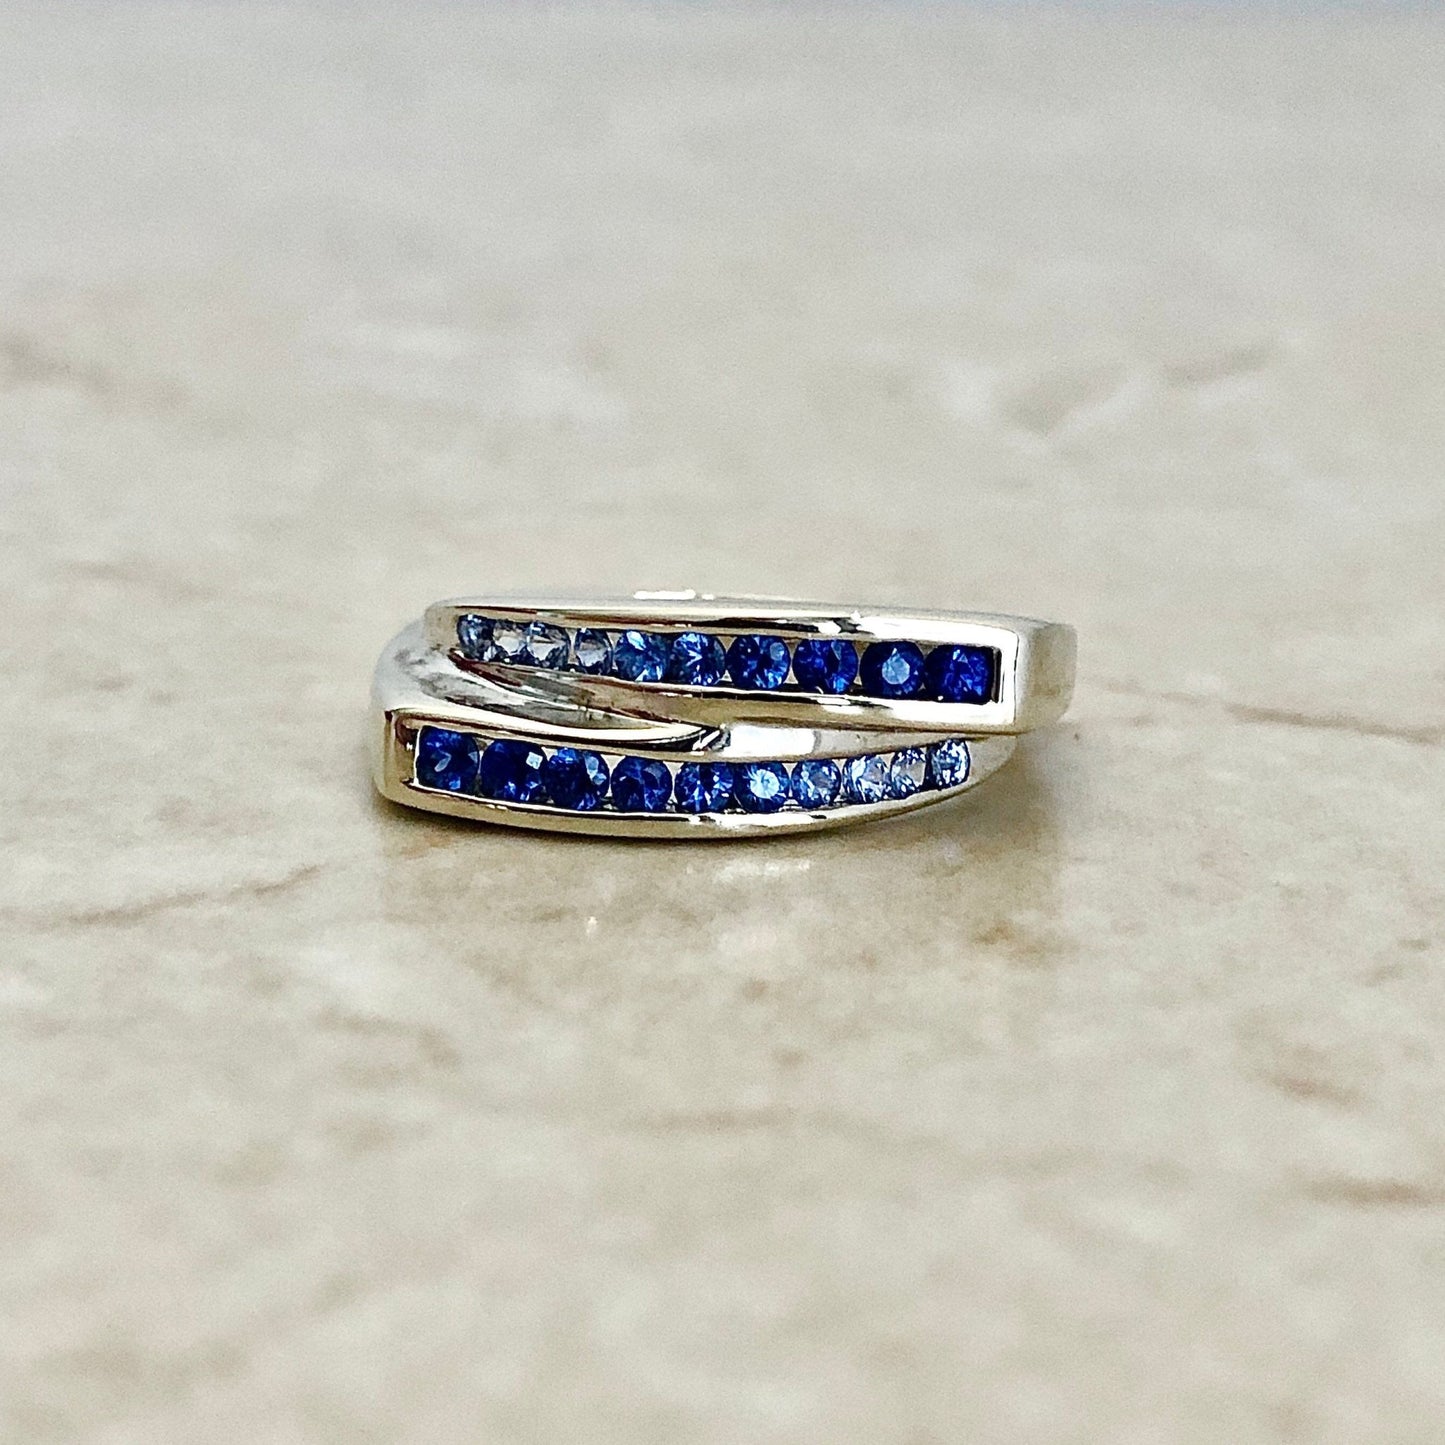 14K Natural Sapphire Band Ring Double Row - White Gold - Genuine Gemstone - Graduated Sapphire Ring - Size 5.5 US